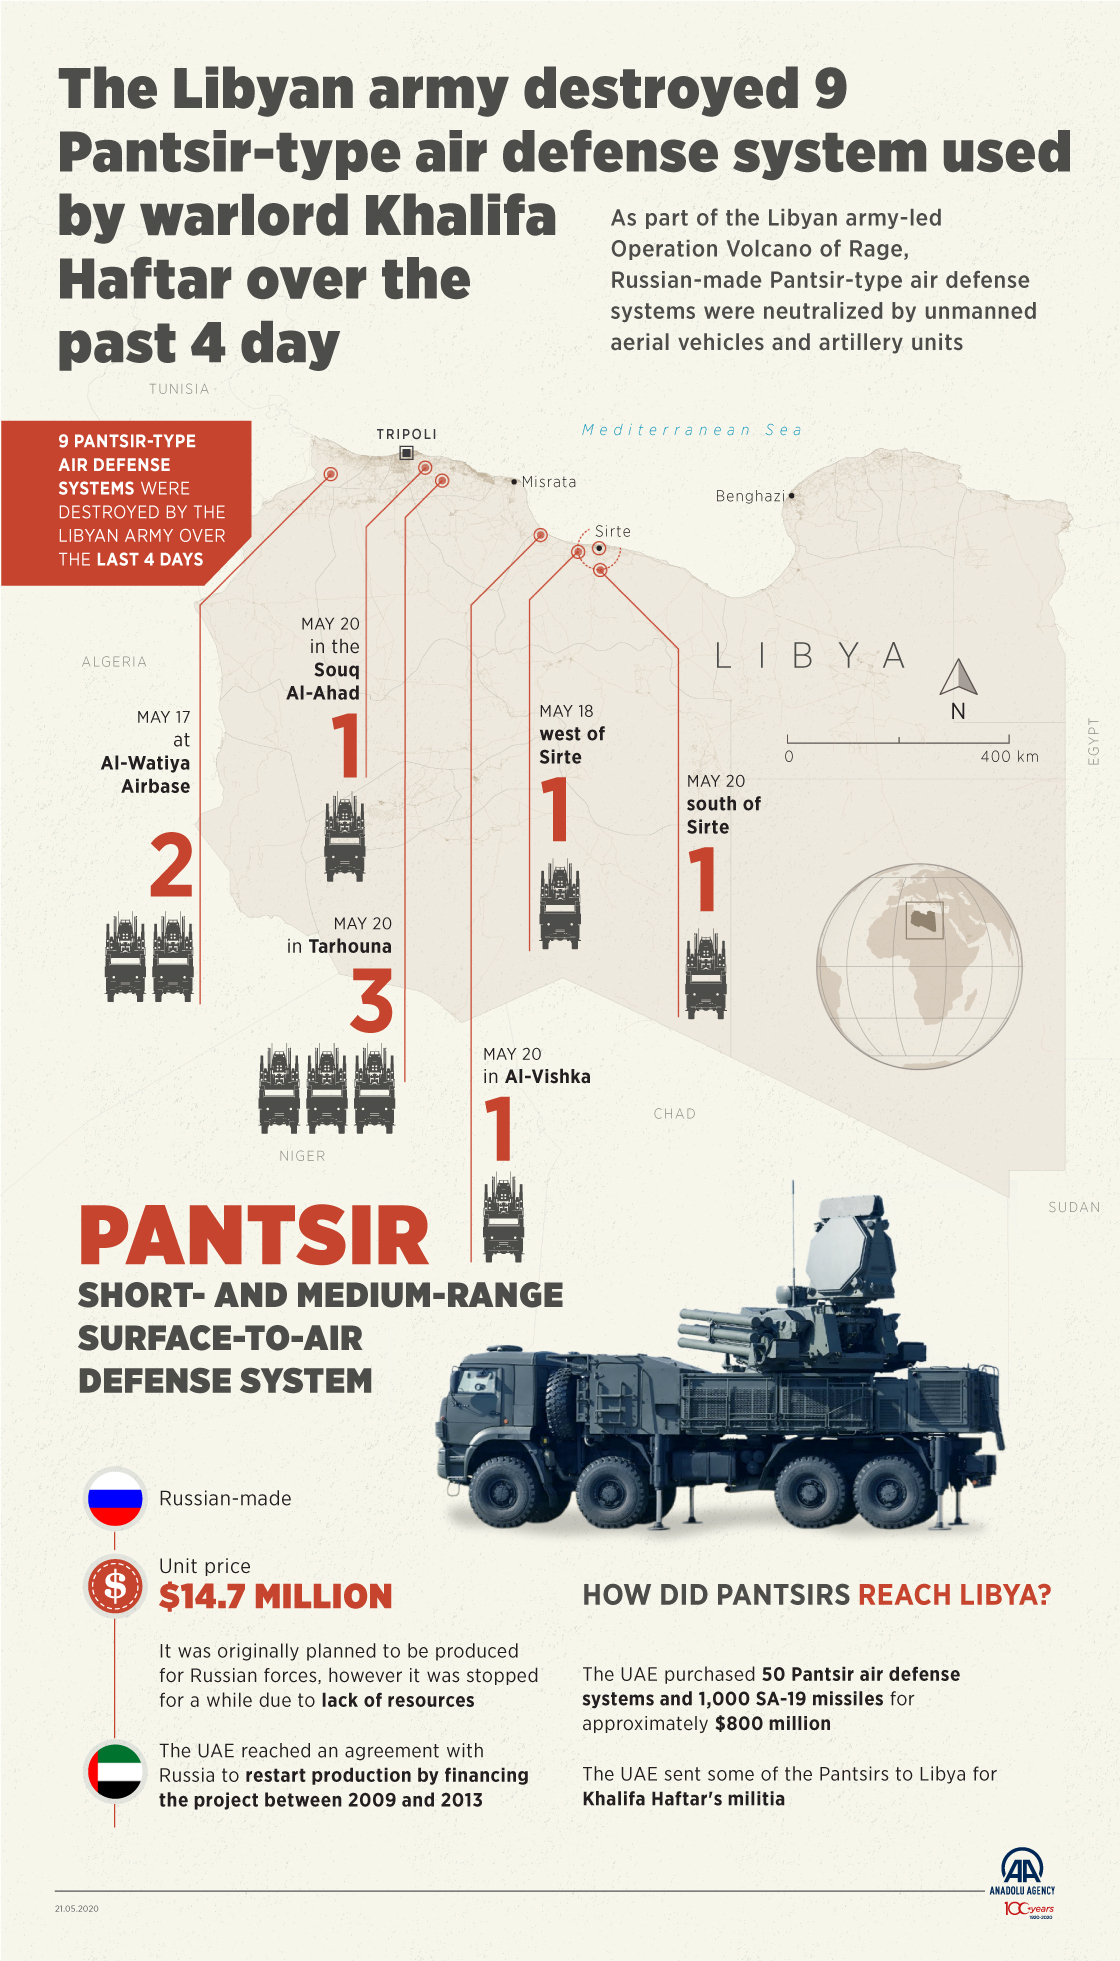 The Libyan army destroyed 9 Pantsir-type air defense system used by warlord Khalifa Haftar over the past 4 days